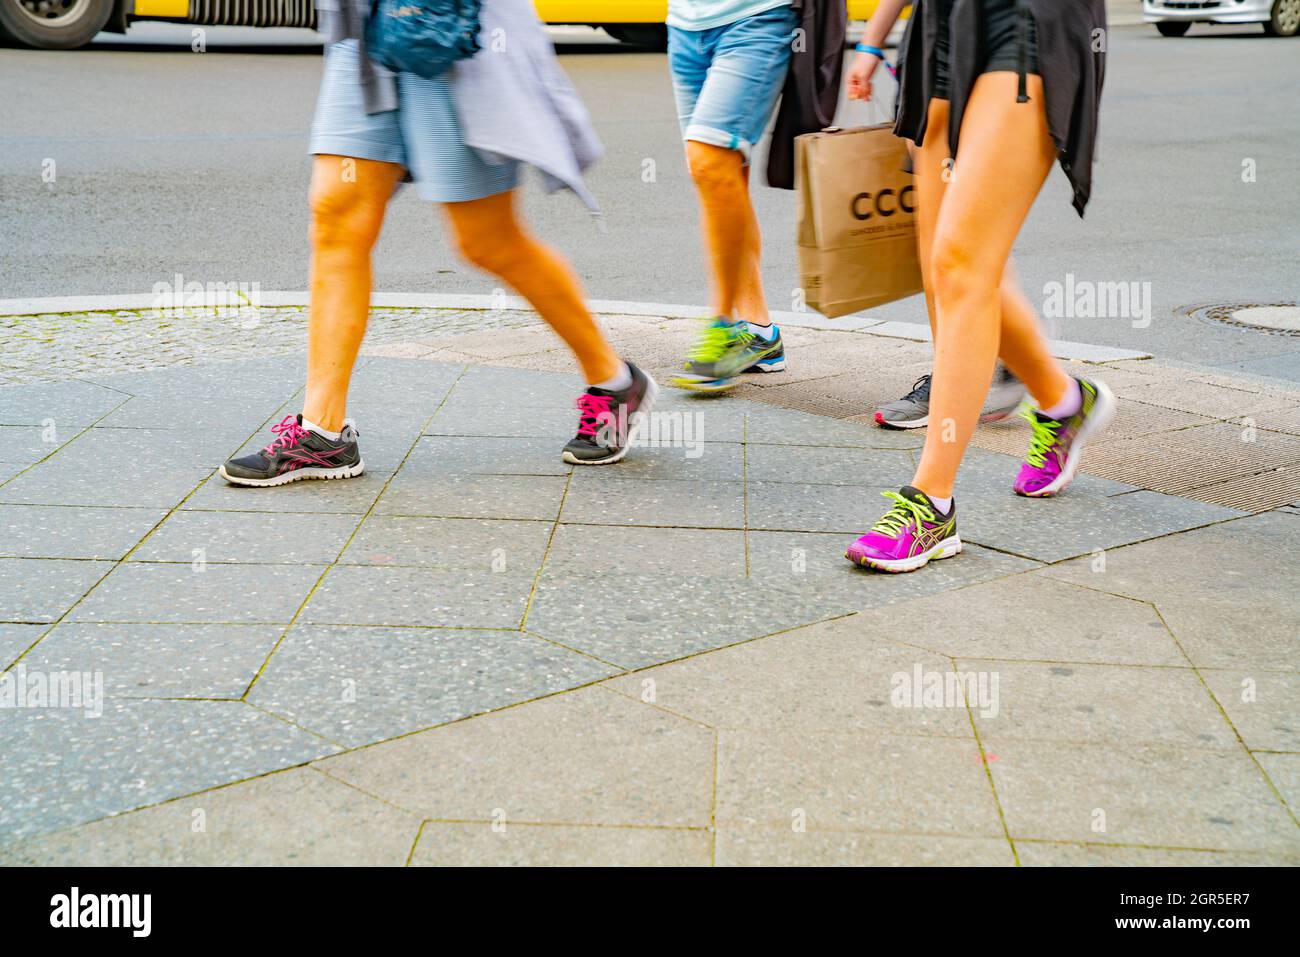 Berlin, Germany - September 25, 2017: Four girls in sports shoes blurred  while walking on pavement one carring shopping bag Stock Photo - Alamy